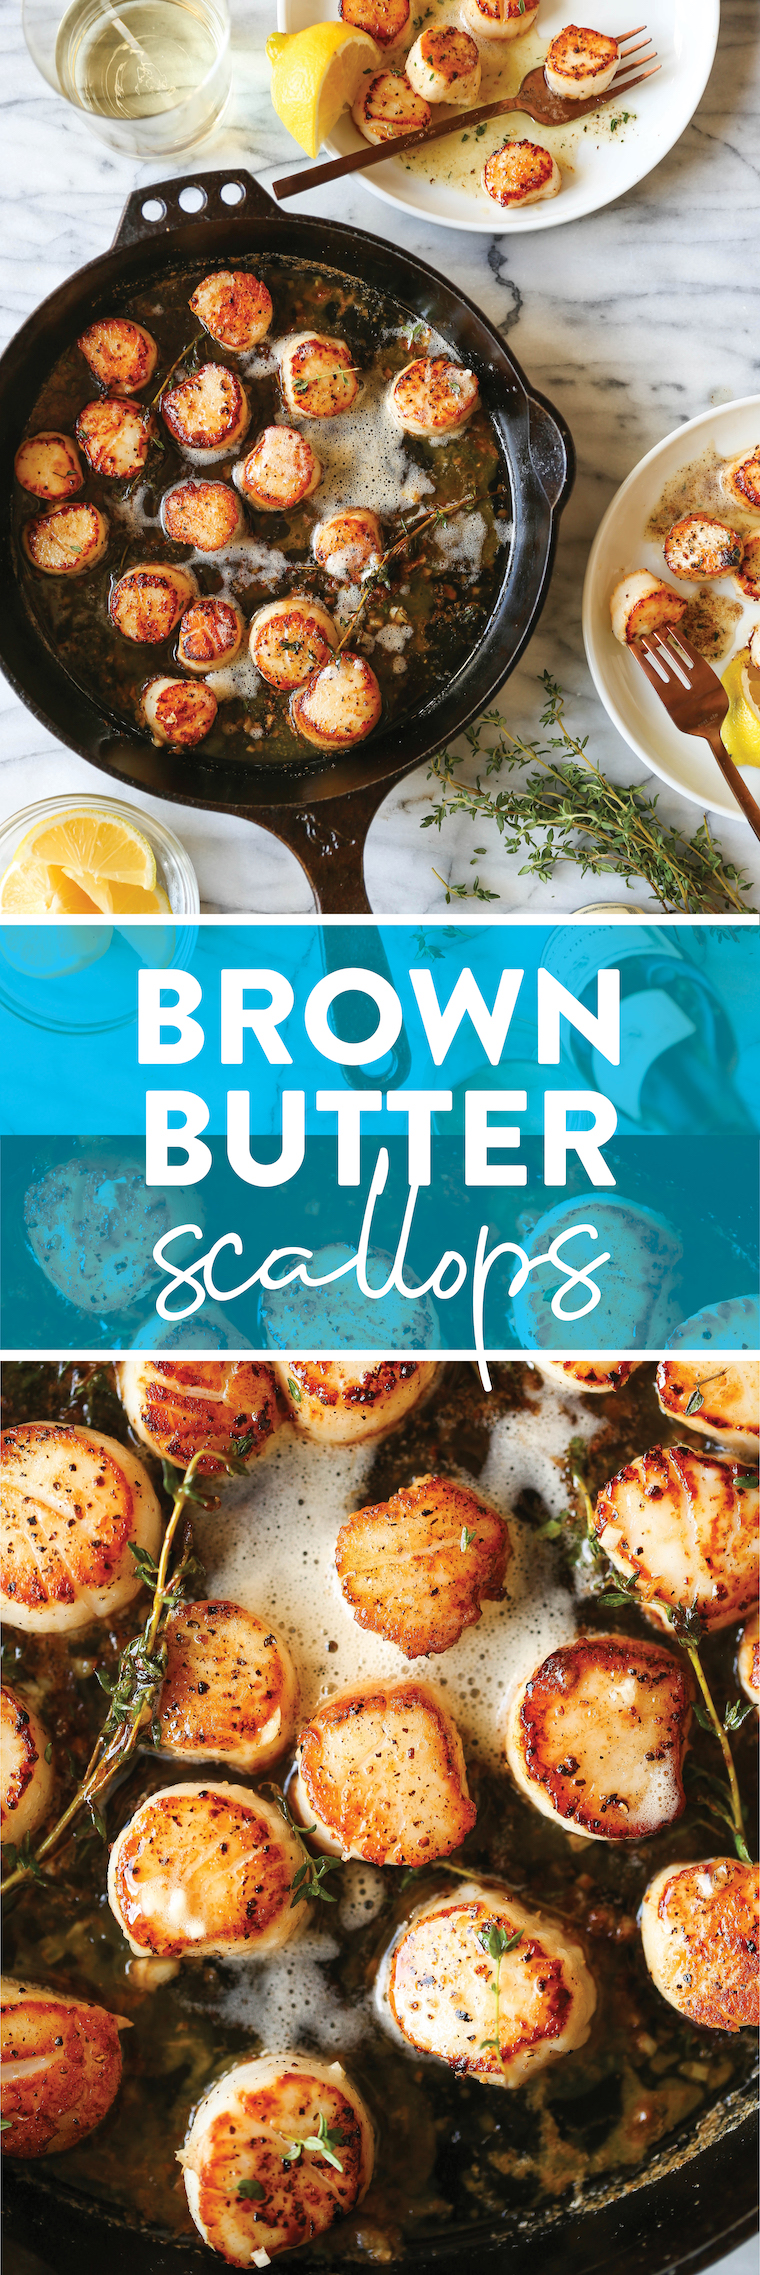 Brown Butter Scallops - Cook the most perfect scallops every. single. time. So fast and easy to make (just 5 ingredients) yet so so fancy!